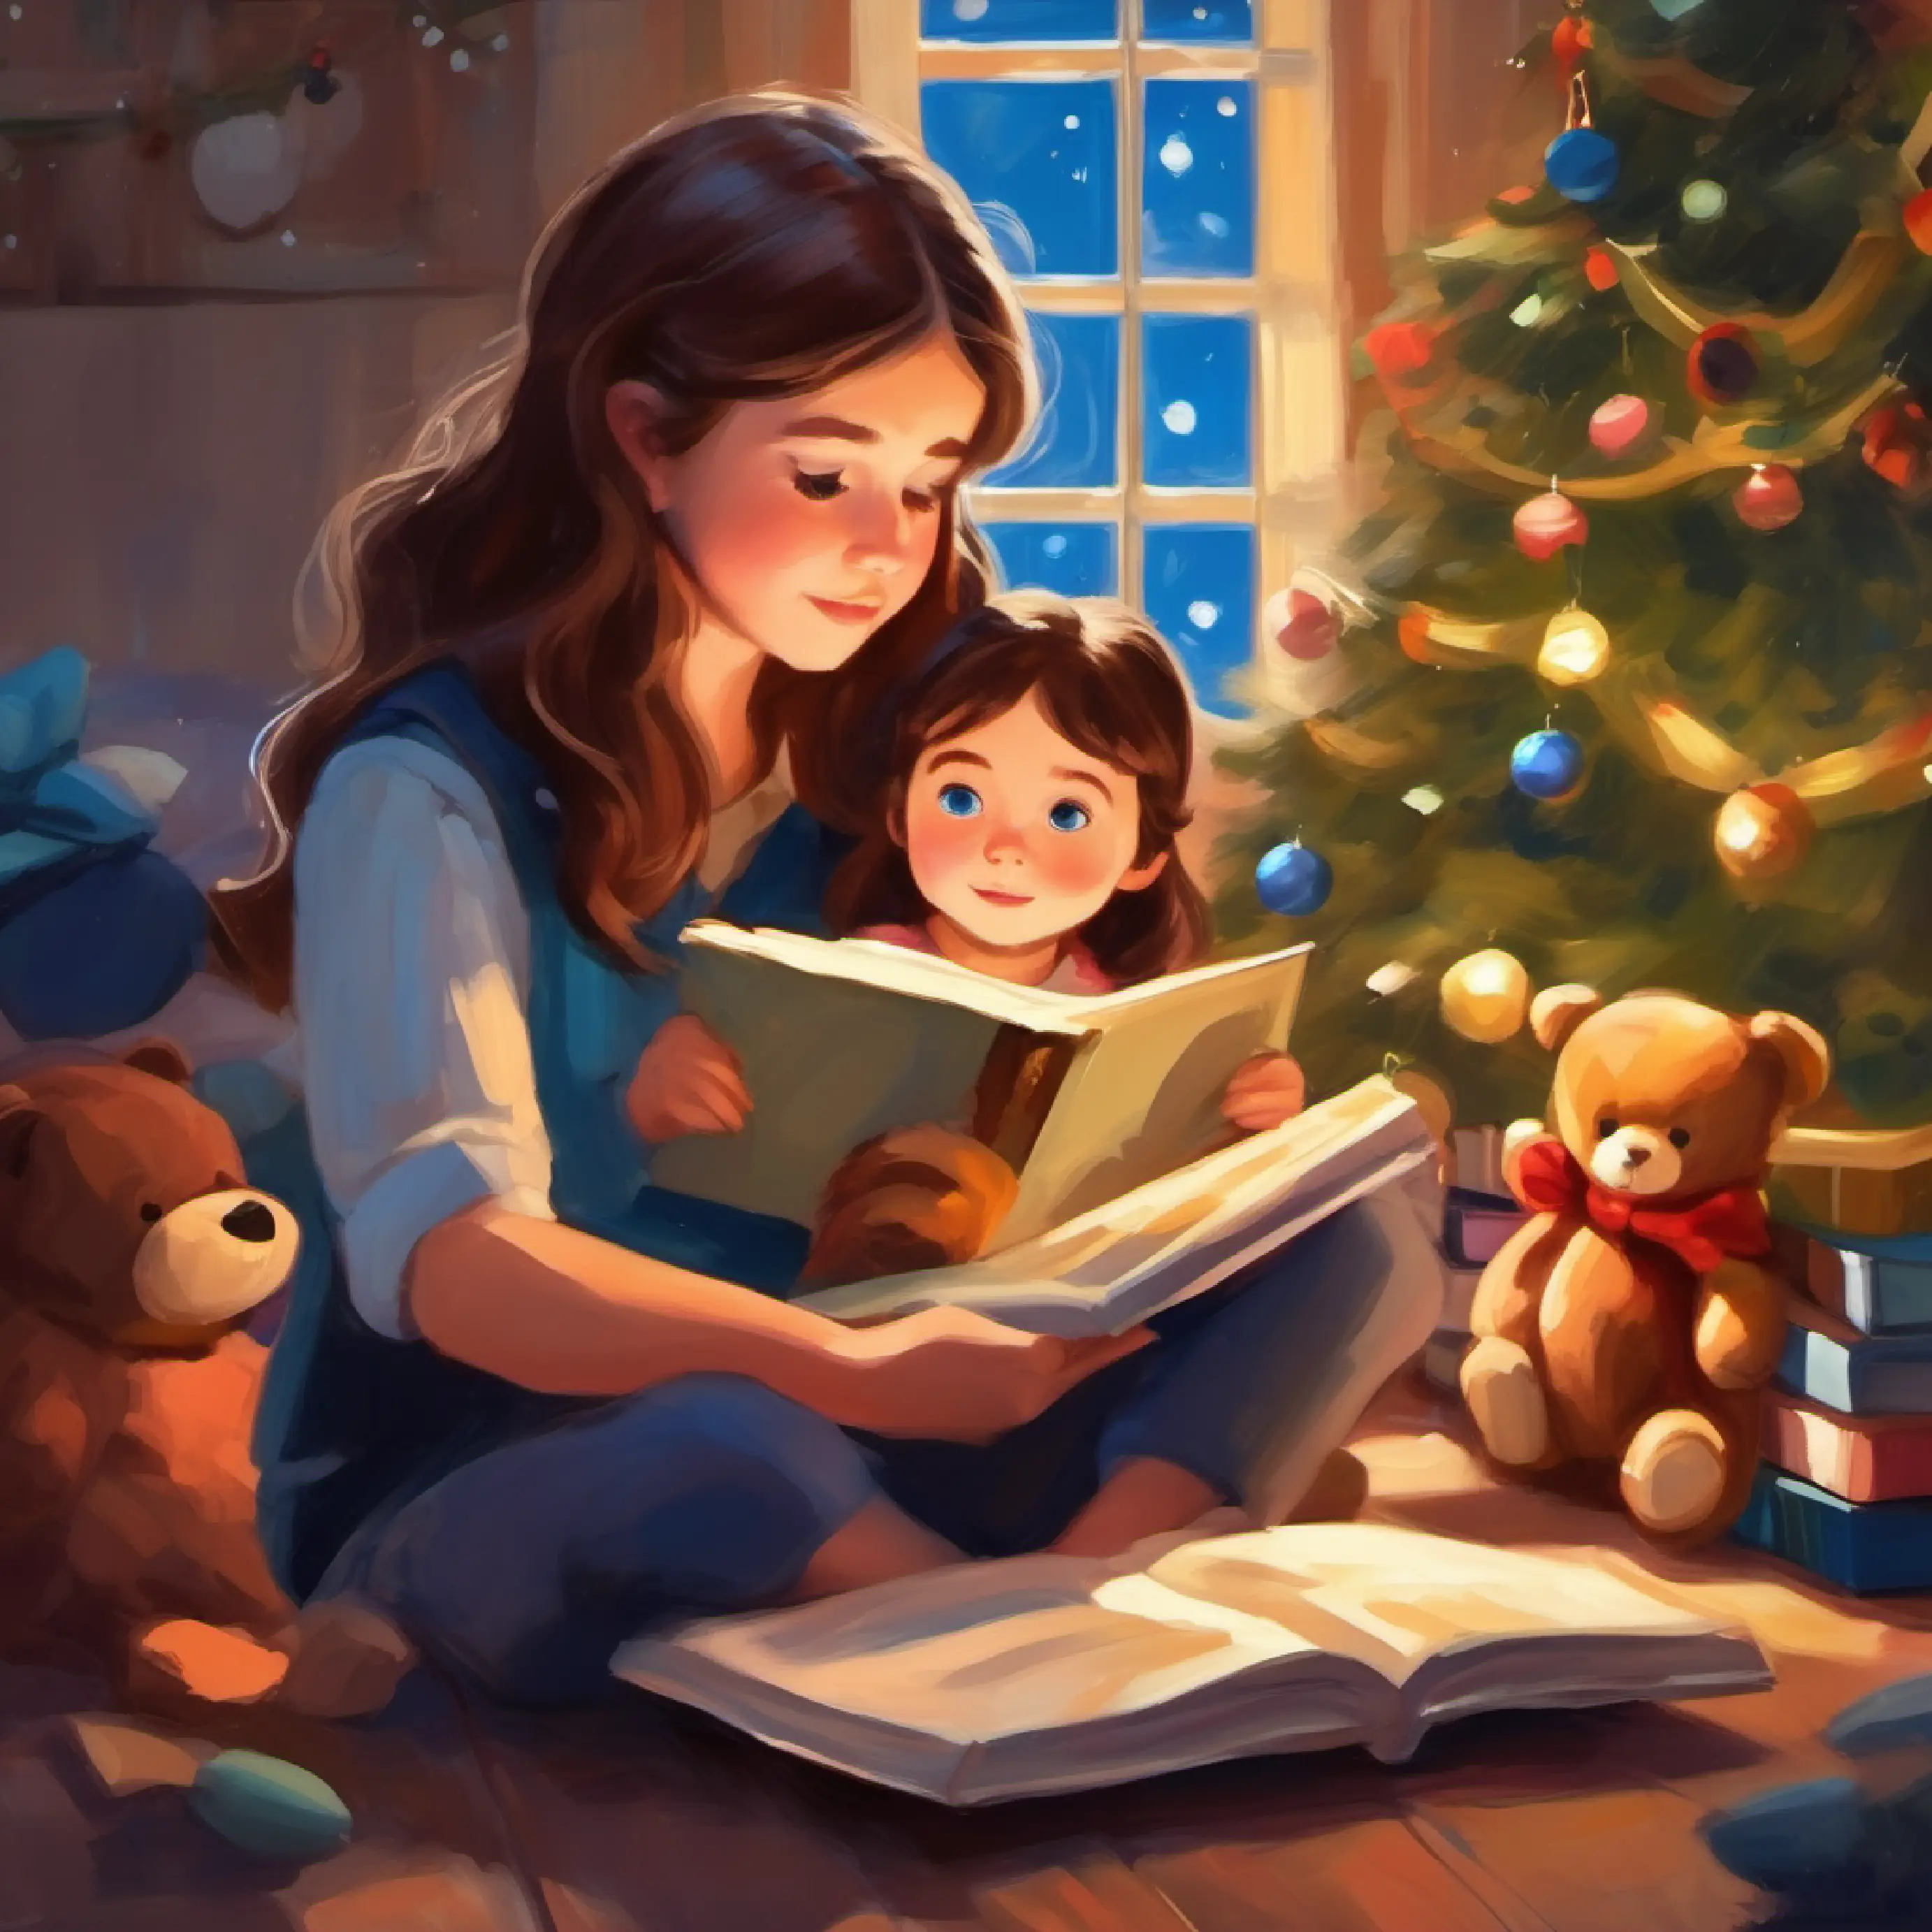 Small girl, brown hair, blue eyes, holding a stuffed bear is imagining the story as her dad reads it.